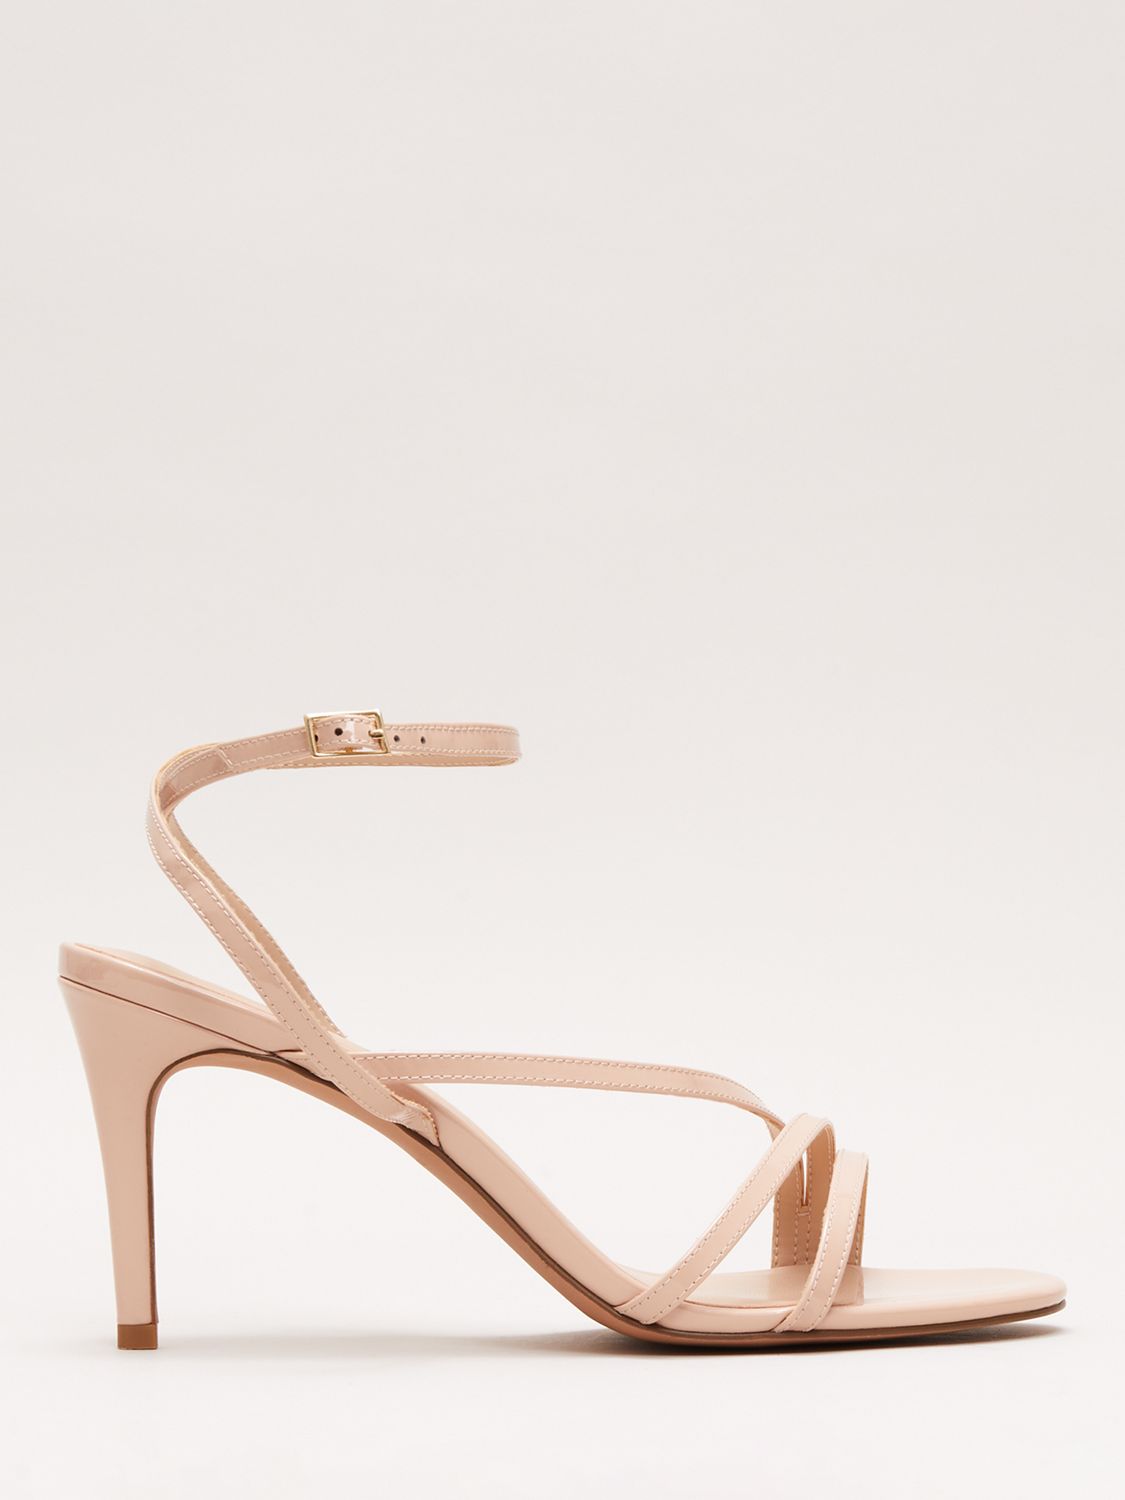 Phase Eight Patent Leather Barely There Strappy Sandals, Pale Pink, EU36